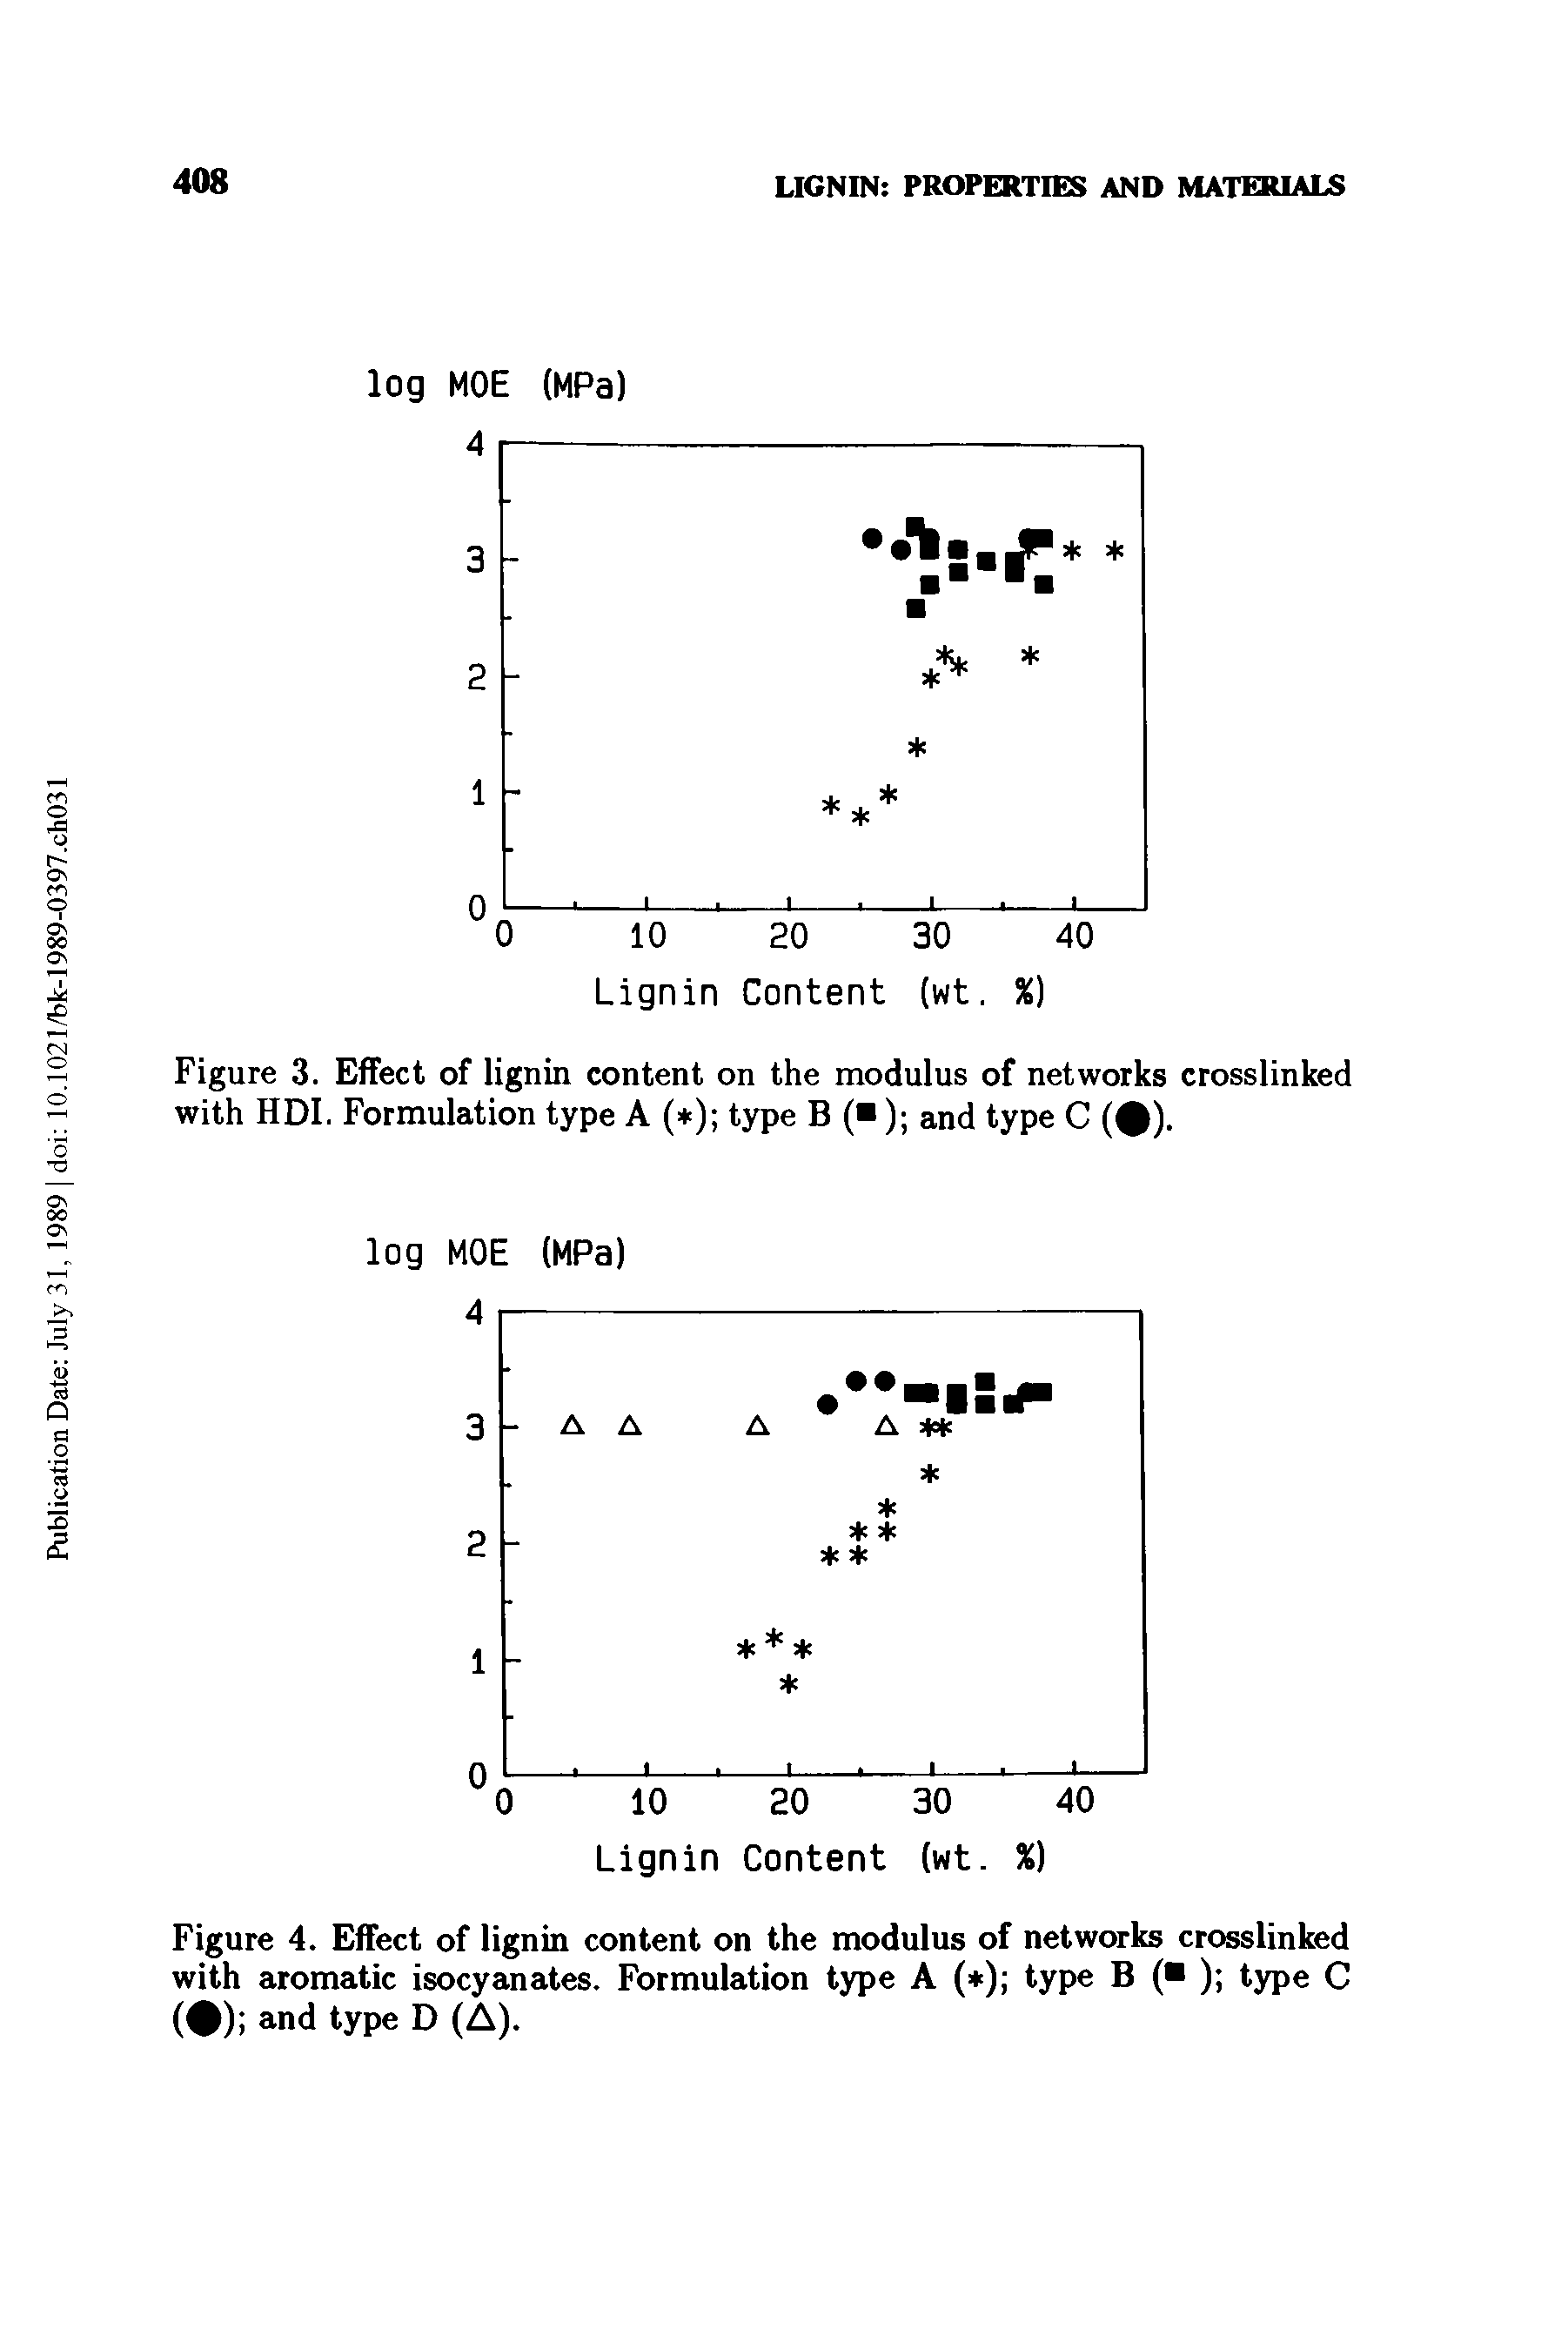 Figure 3. Effect of lignin content on the modulus of networks crosslinked with HDI. Formulation type A ( ) type B ( ) and type C (0).